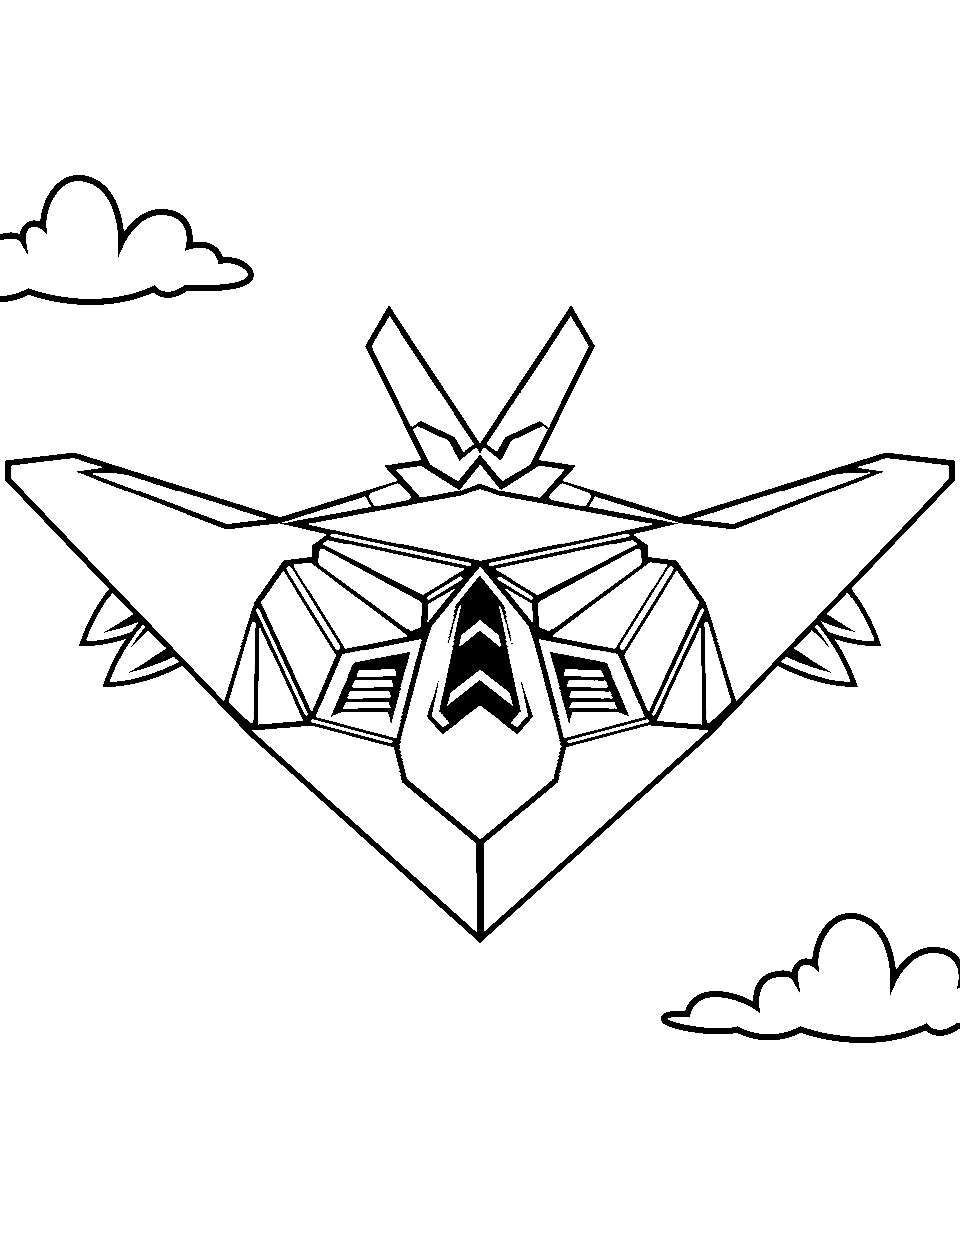 Stealth Bomber Airplane Coloring Page - A stealth bomber flying undetected in the sky.